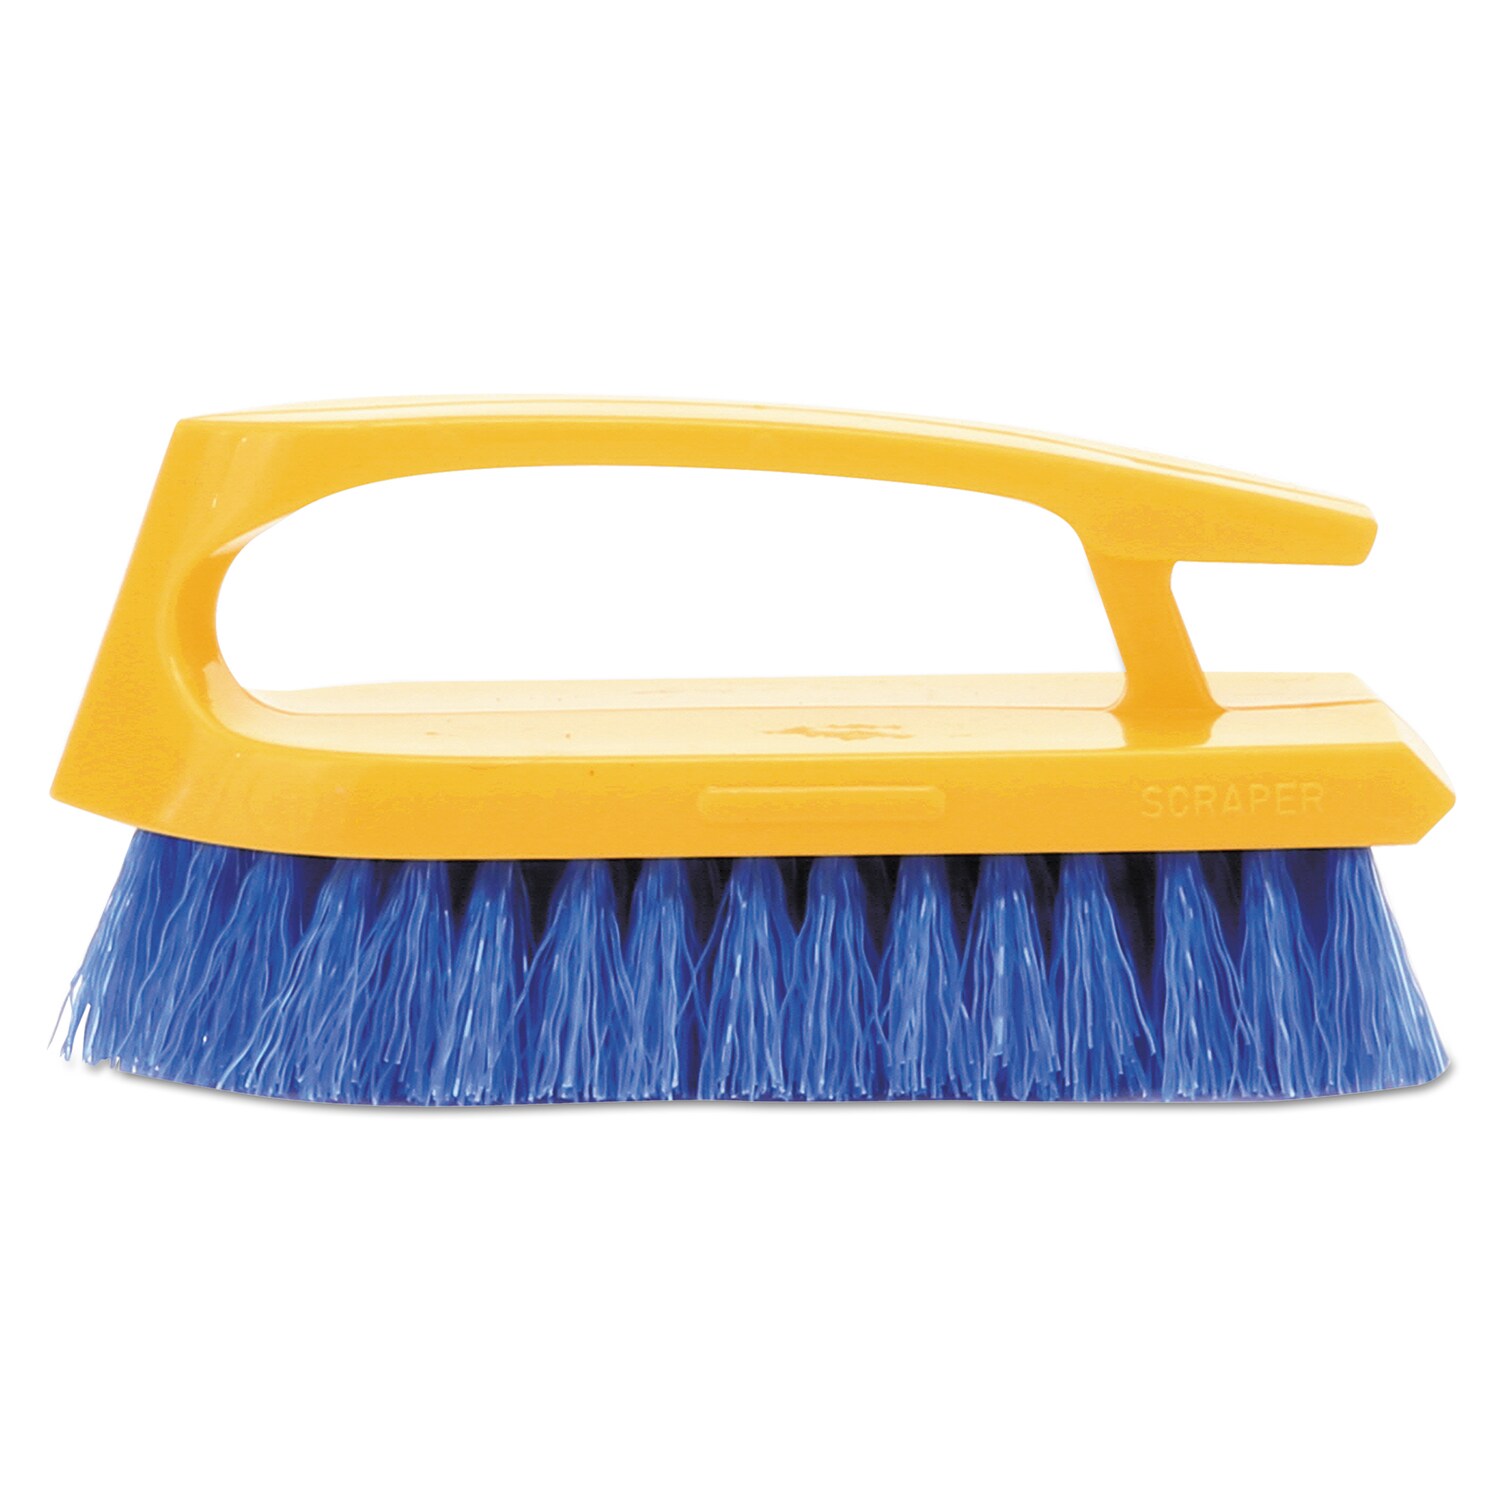 LOT OF 6 RUBBERMAID DECK,SIDEWALK OR PORCH CLEANING BRUSHES # 6337 BLUE 